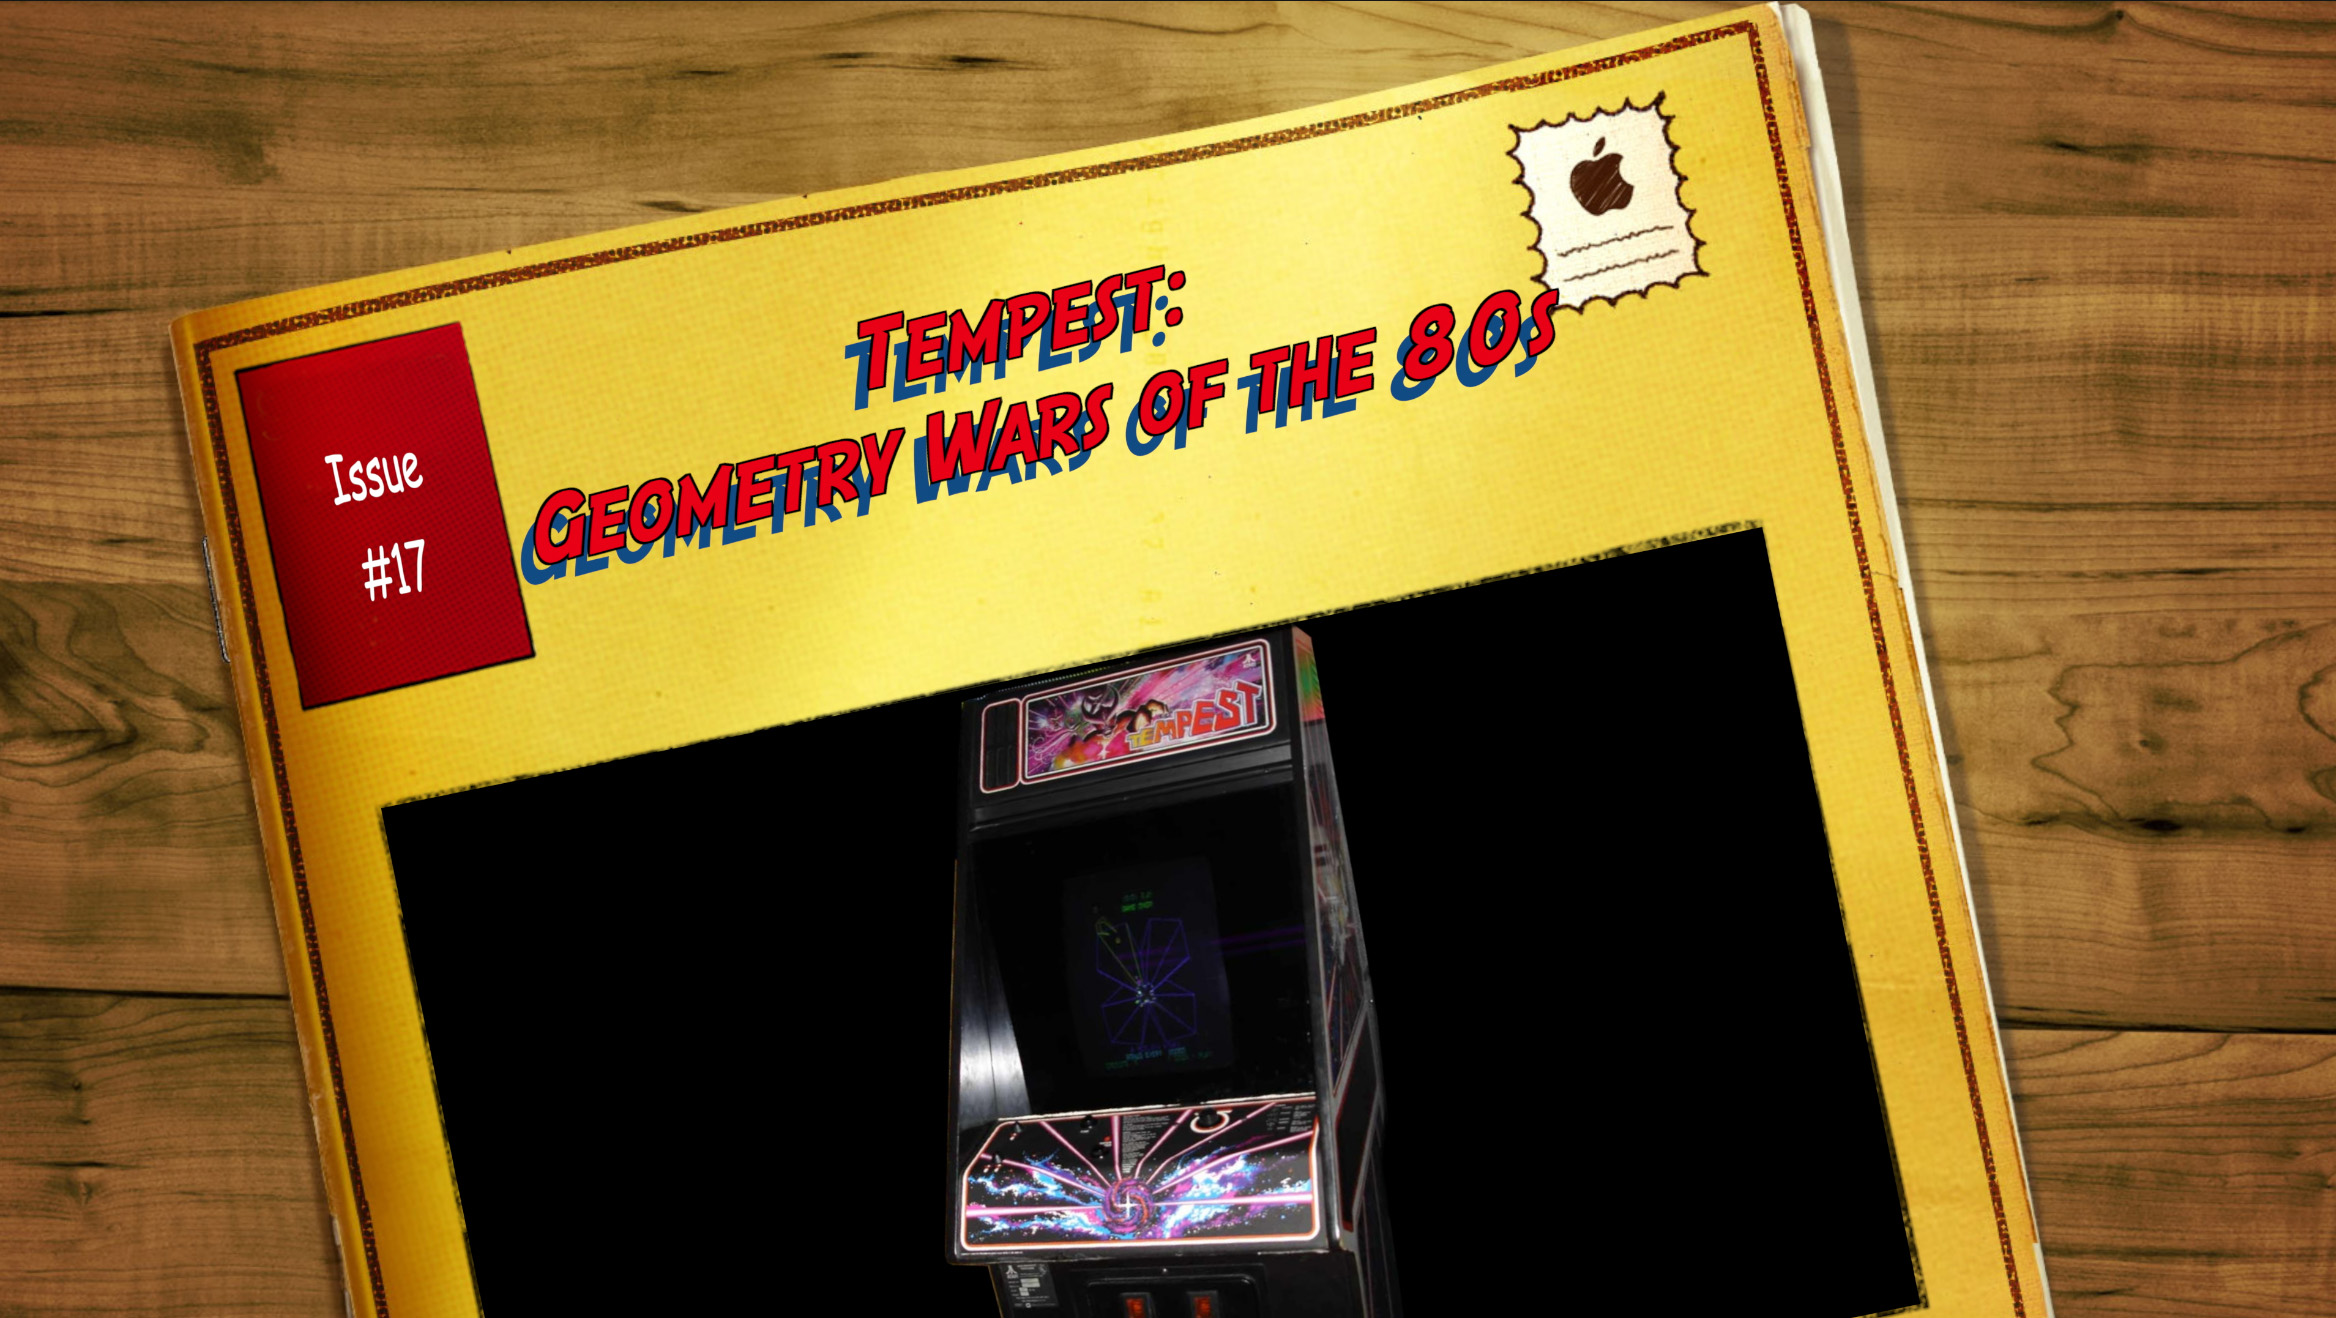 Issue#17 Tempest: Geometry Wars of the 80s